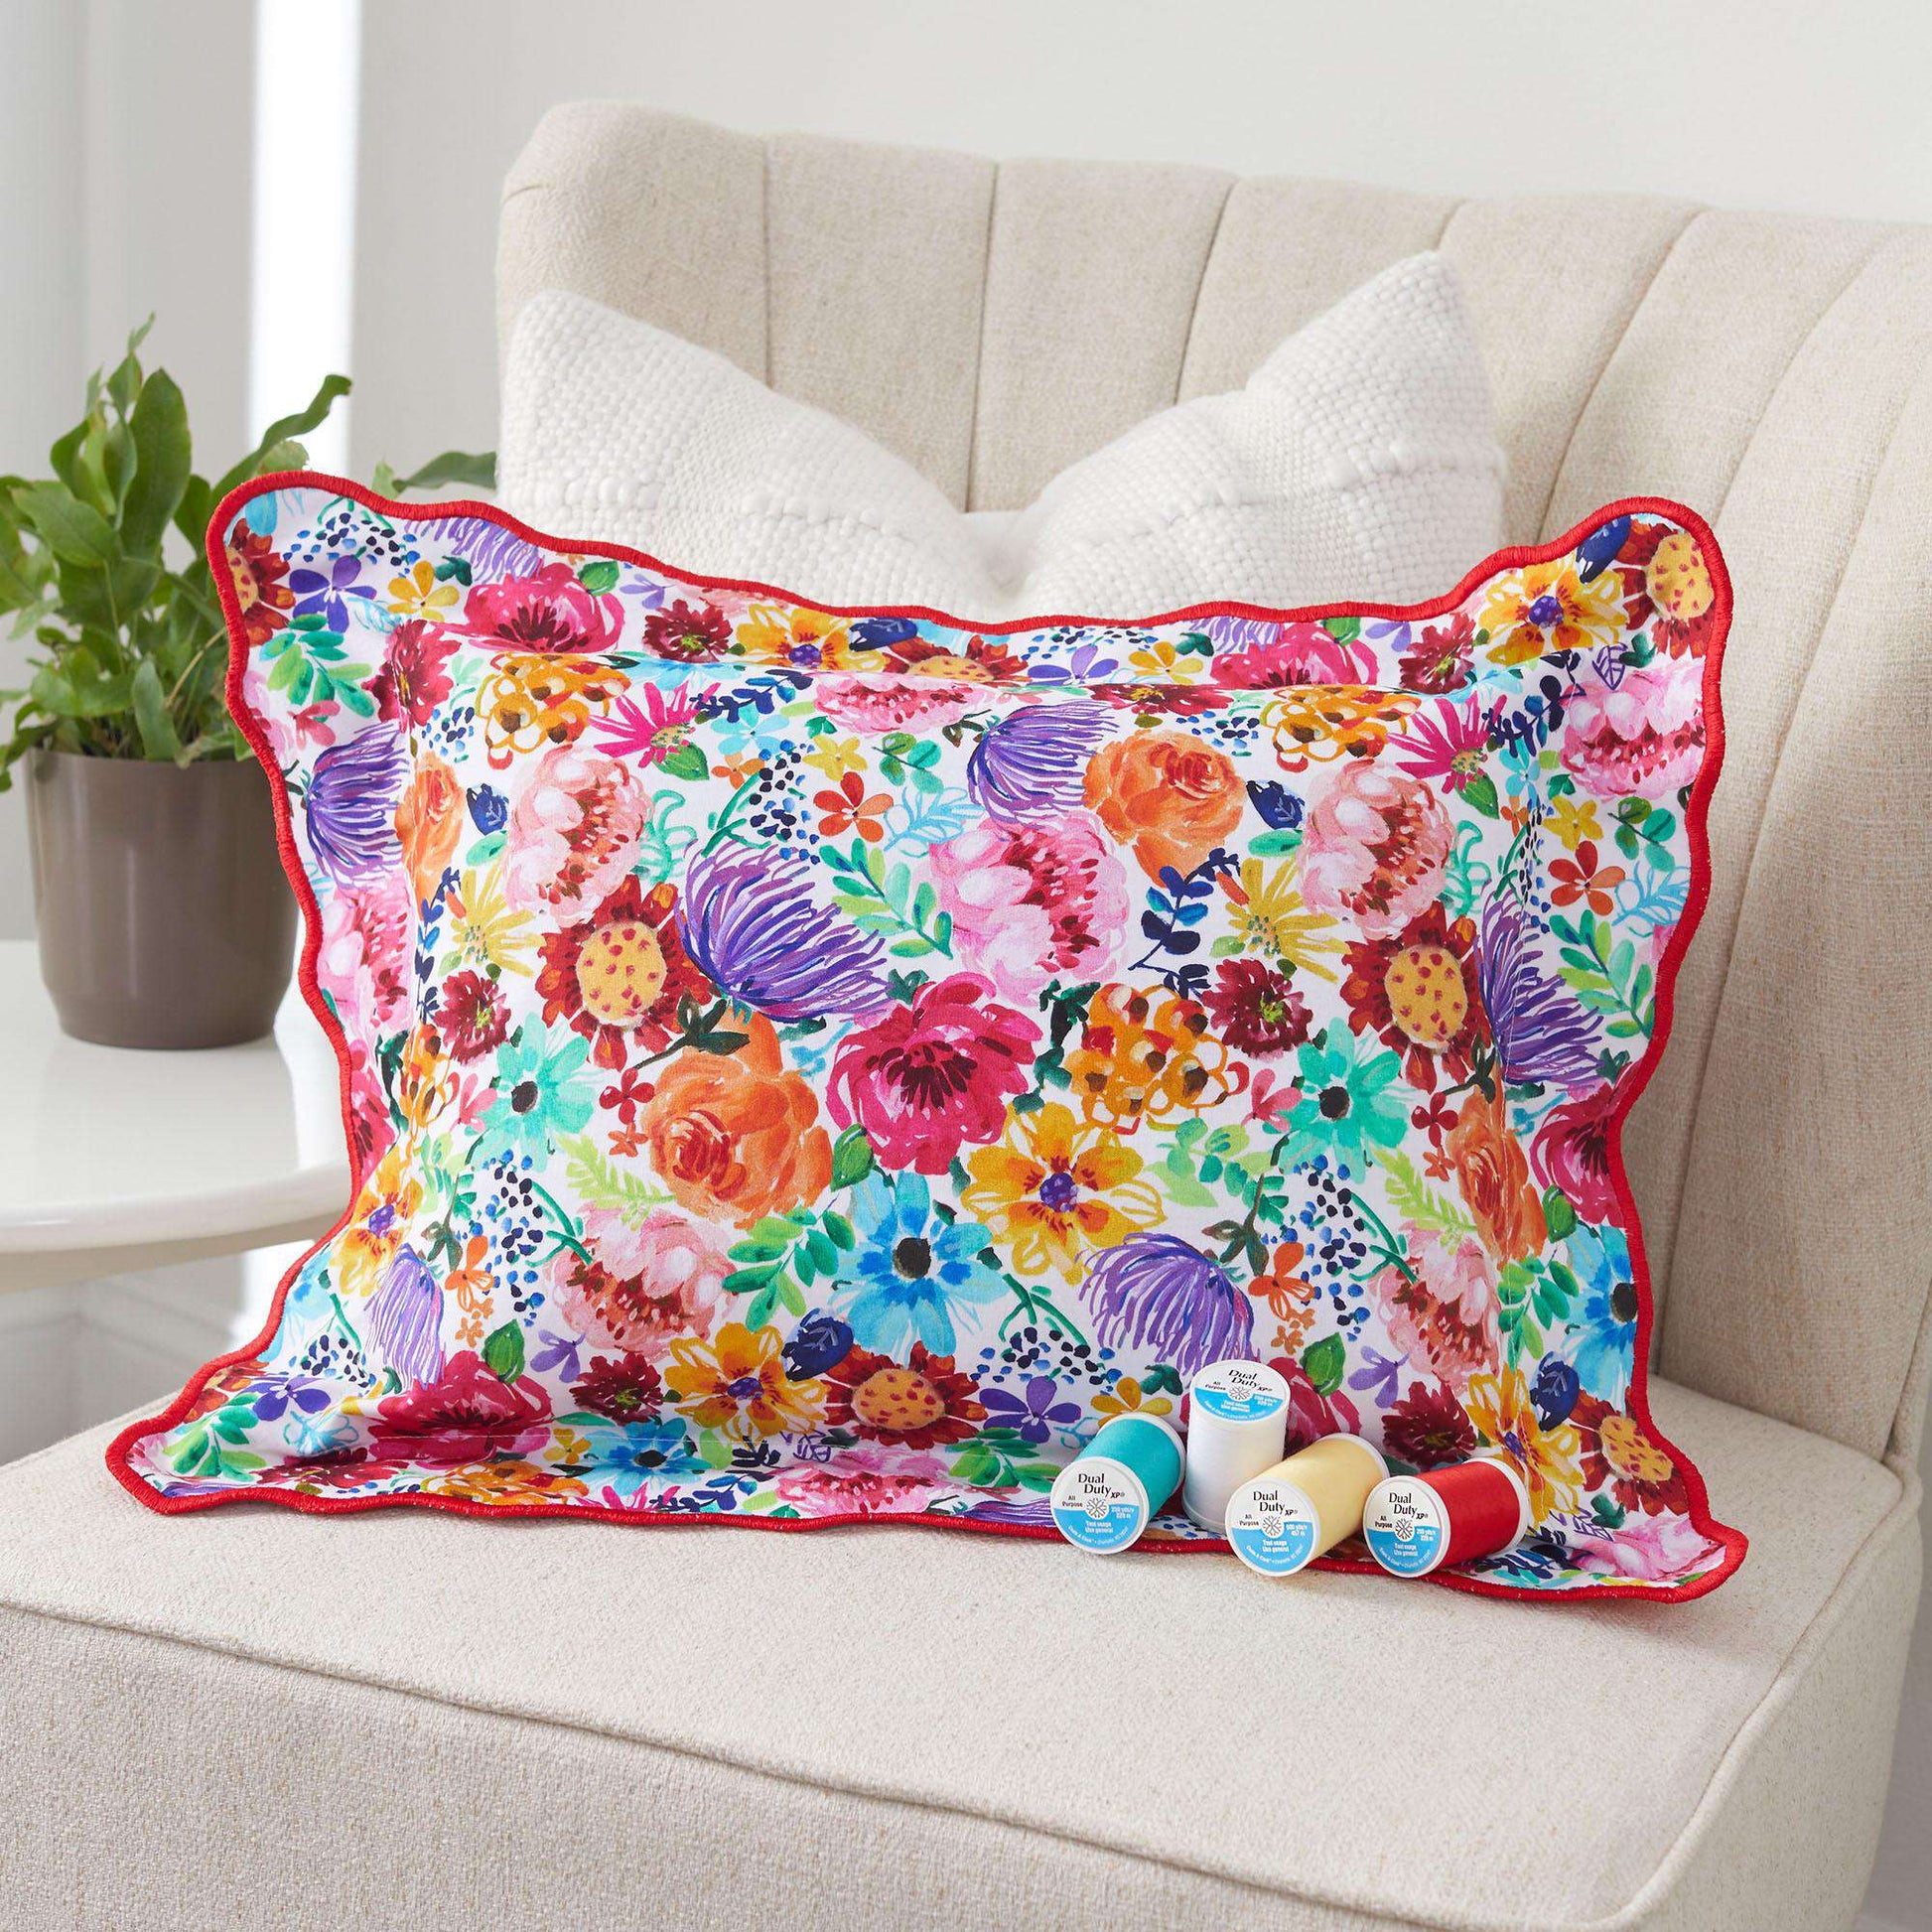 Free Coats & Clark Scalloped Edge Pillow Sewing Pattern